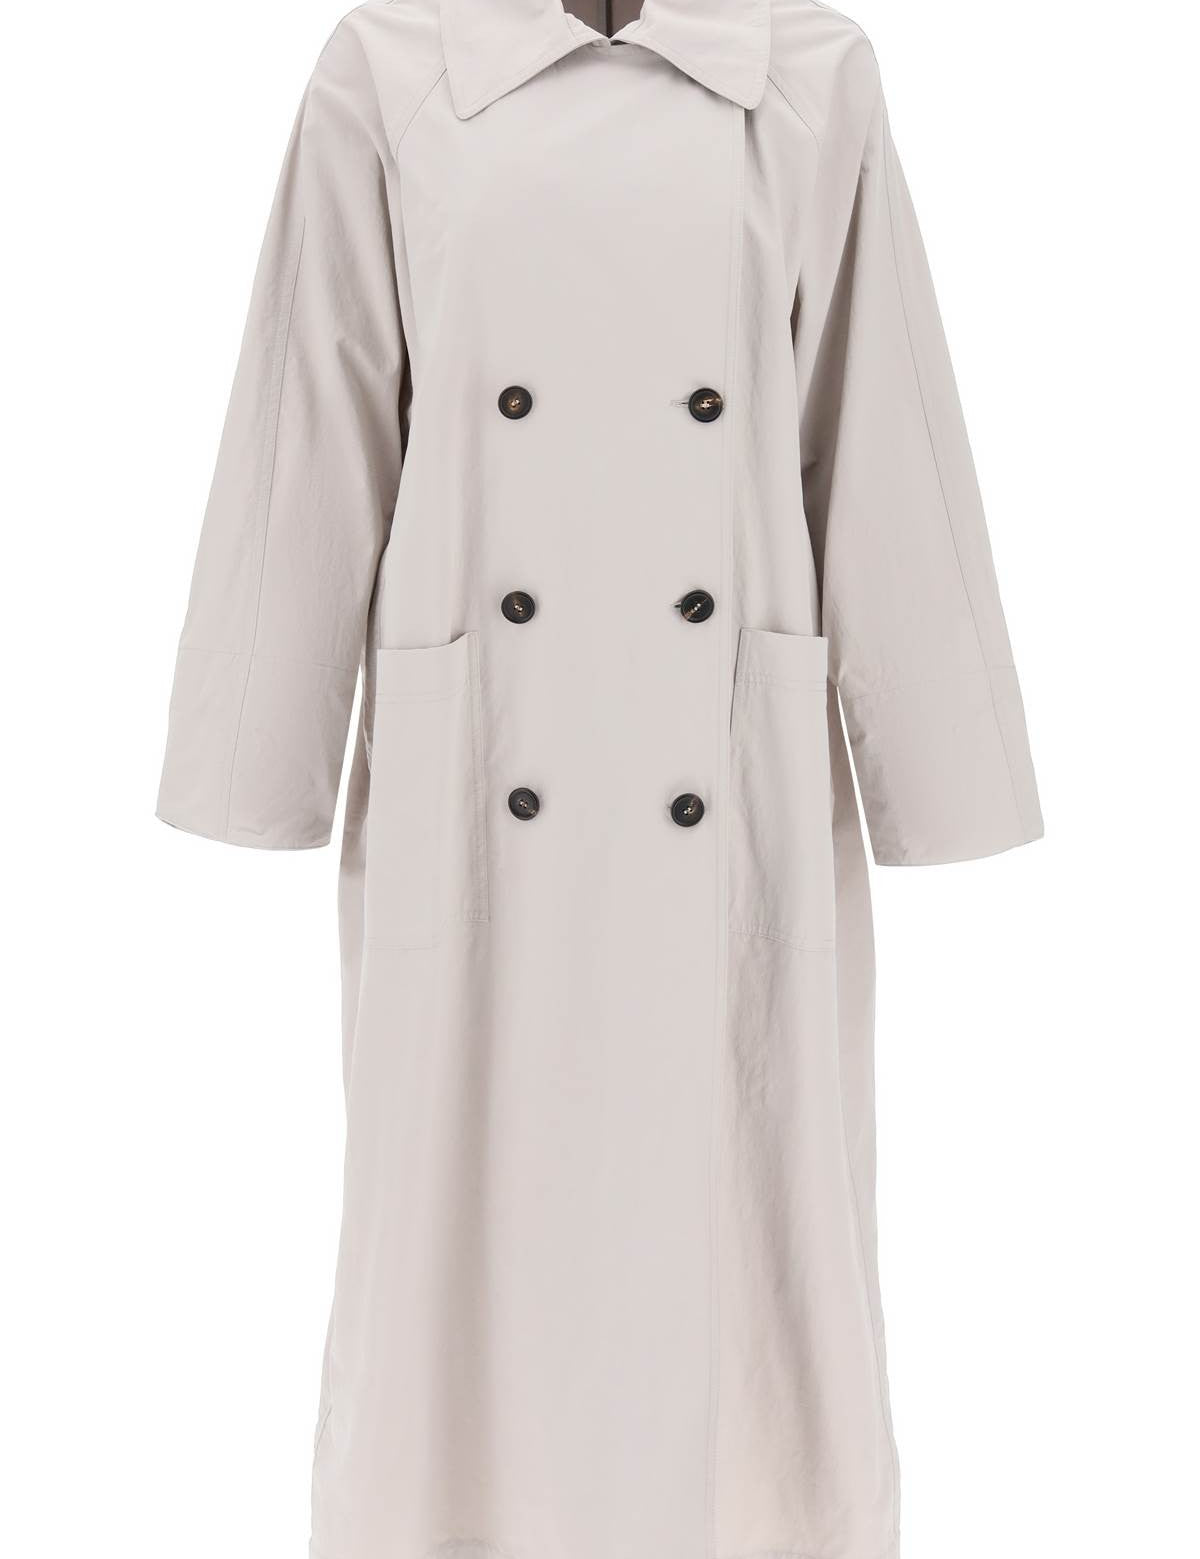 brunello-cucinelli-double-breasted-trench-coat-with-shiny-cuff-details_d9bb35cb-f07e-4934-8218-875952c624ea.jpg